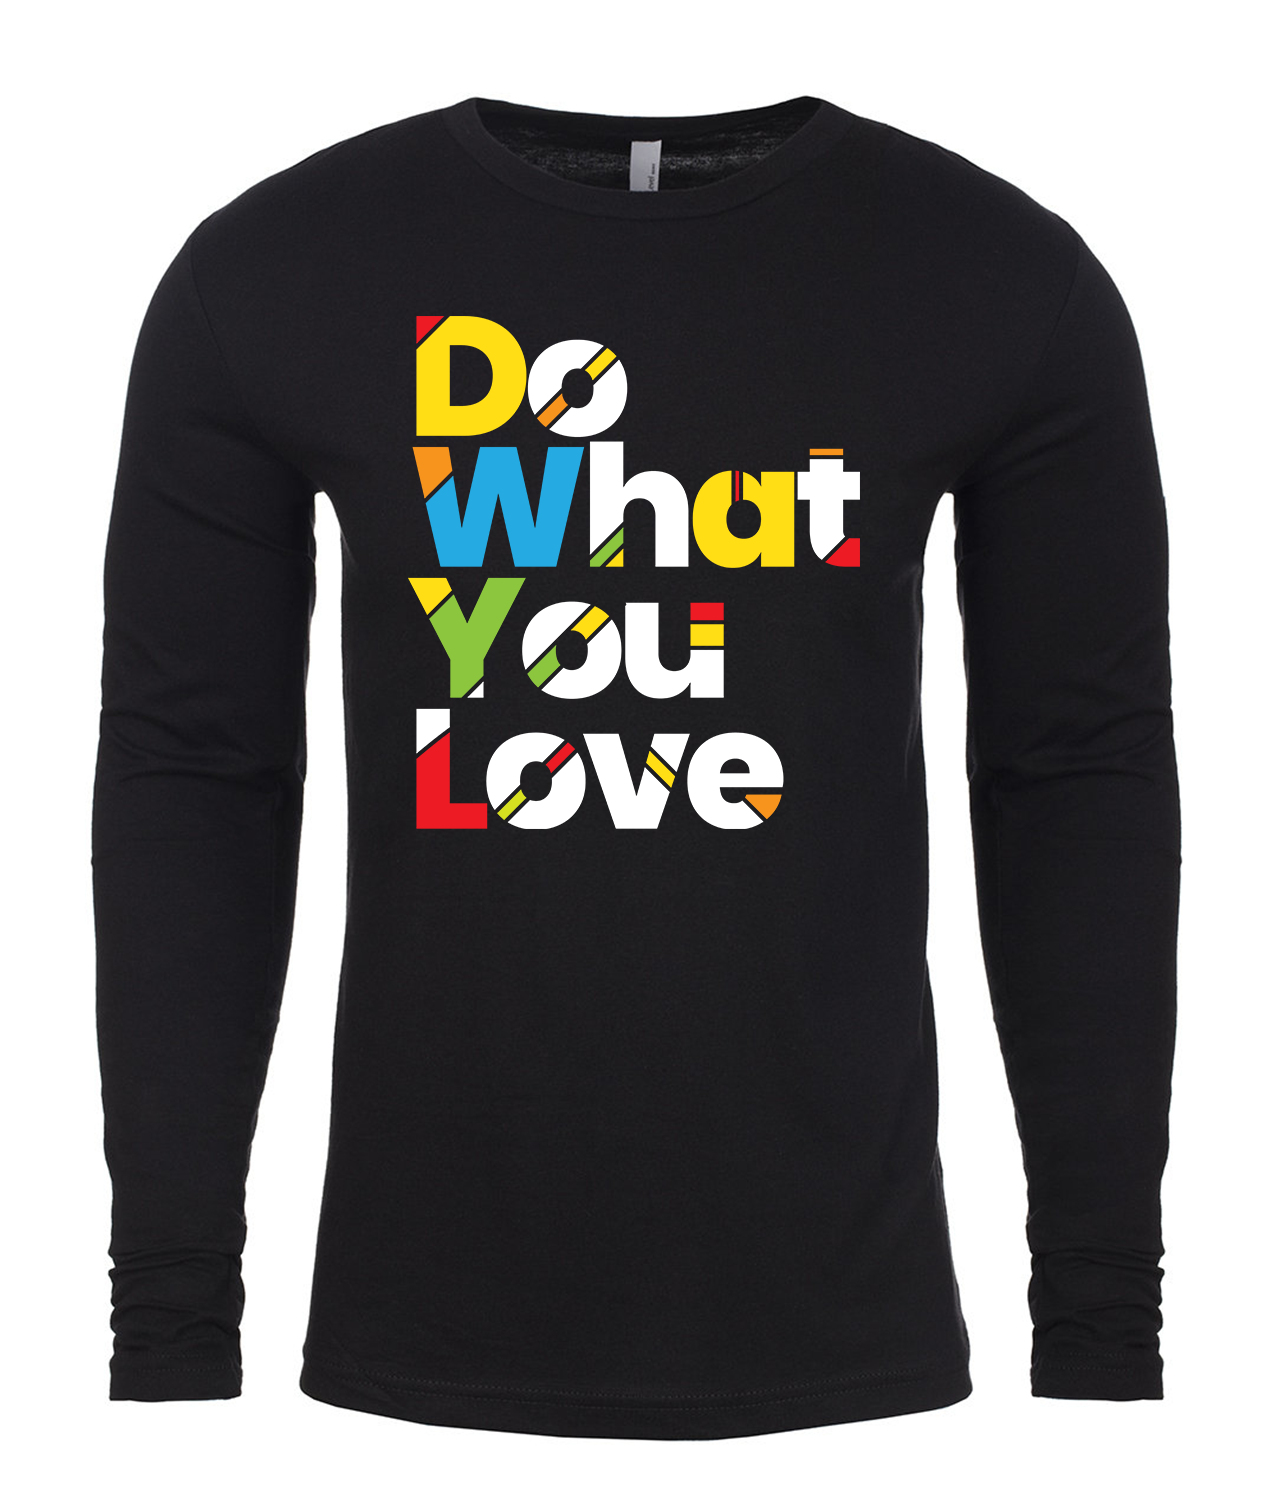 Do What You Love Long-Sleeved T-Shirt